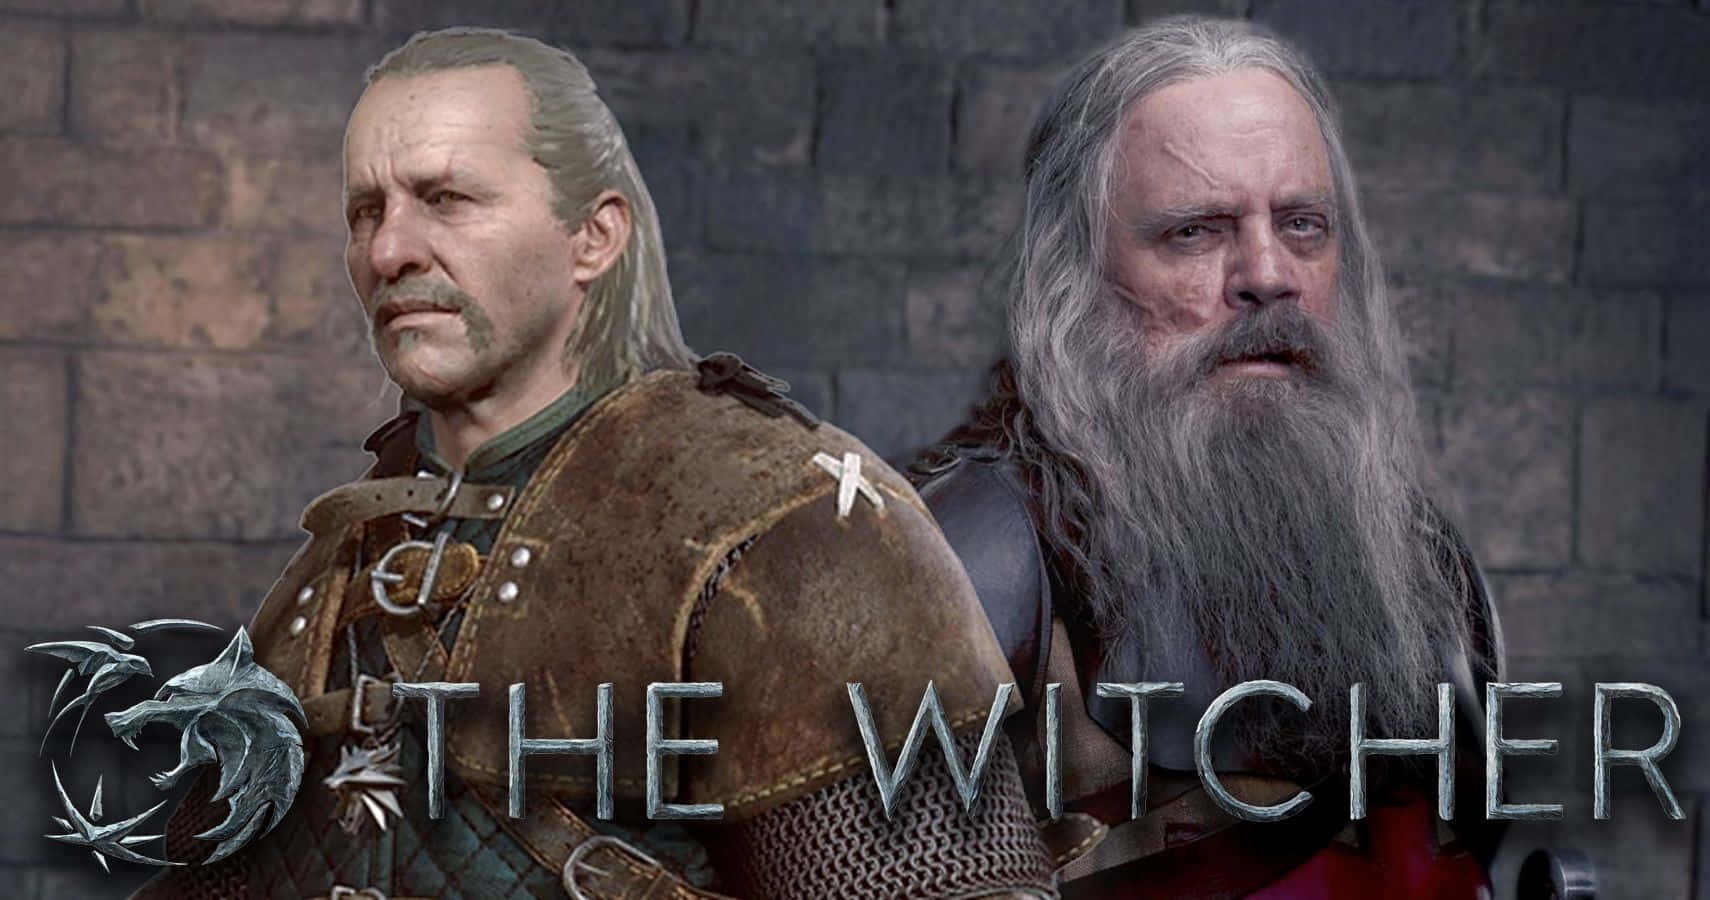 Vesemir Character Comparison The Witcher Wallpaper